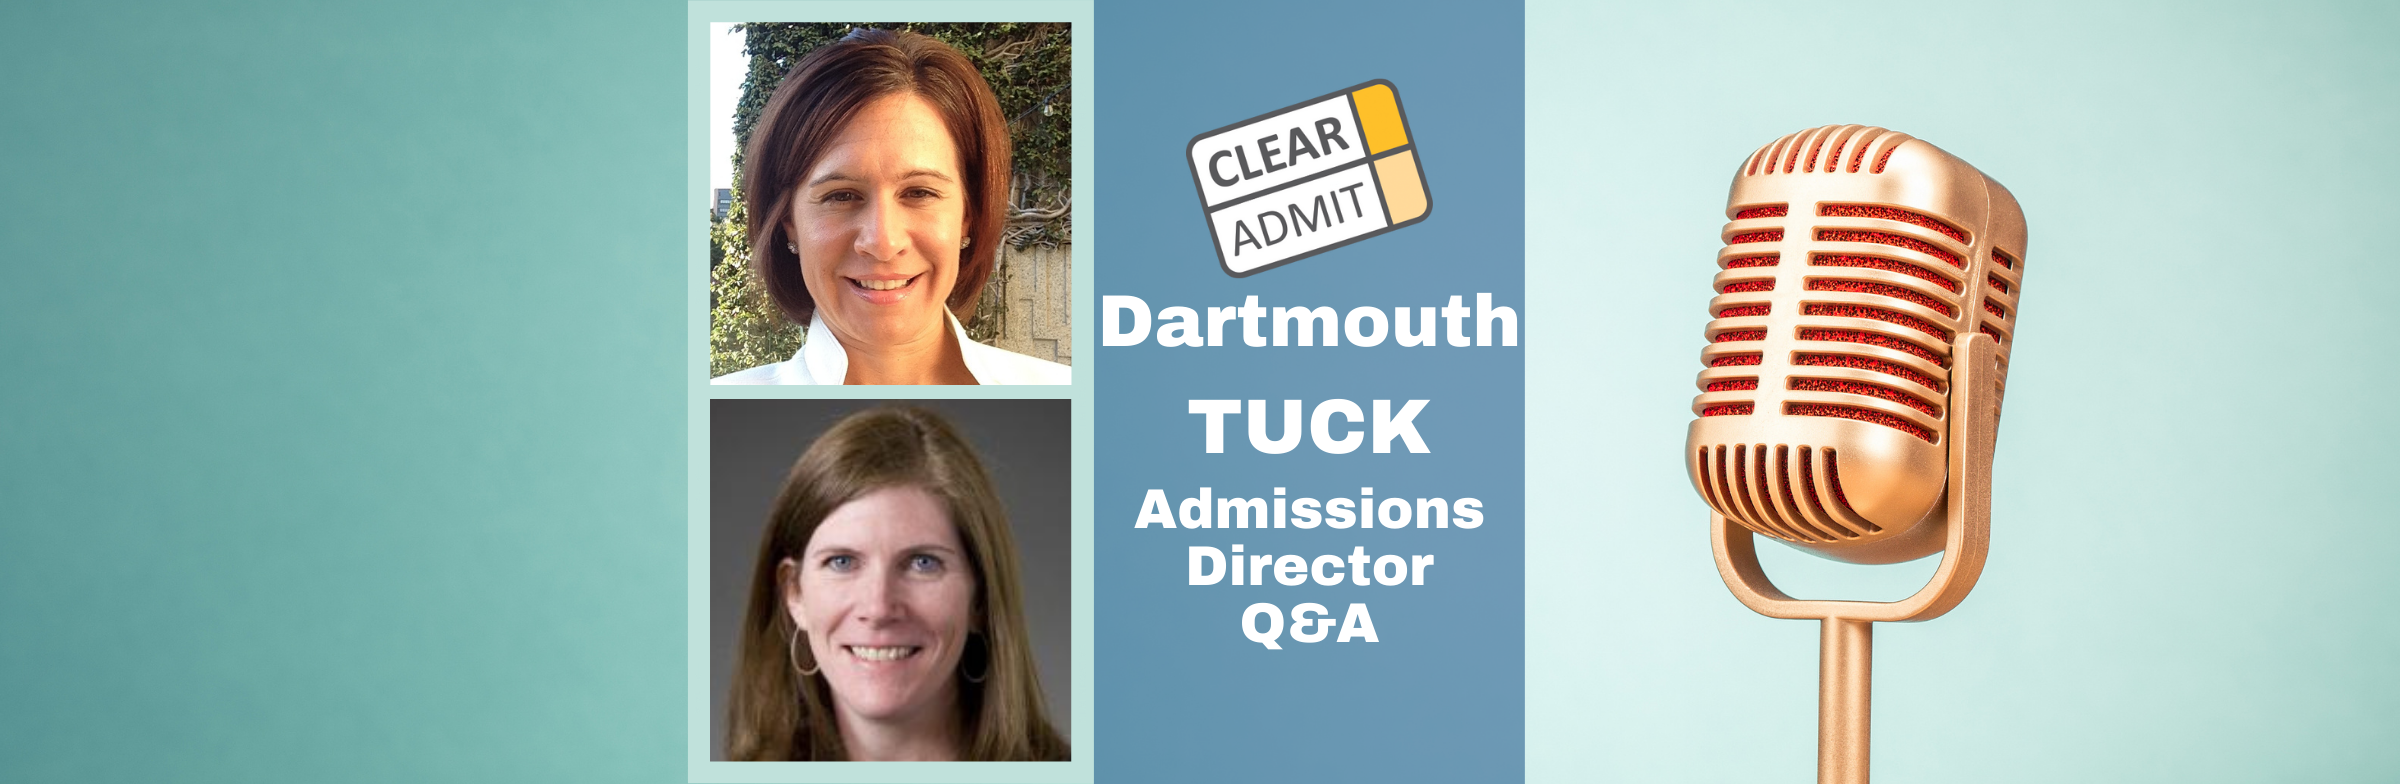 Image for Admissions Director Q&A: Amy Mitson & Pat Harrison of the Dartmouth Tuck School of Business